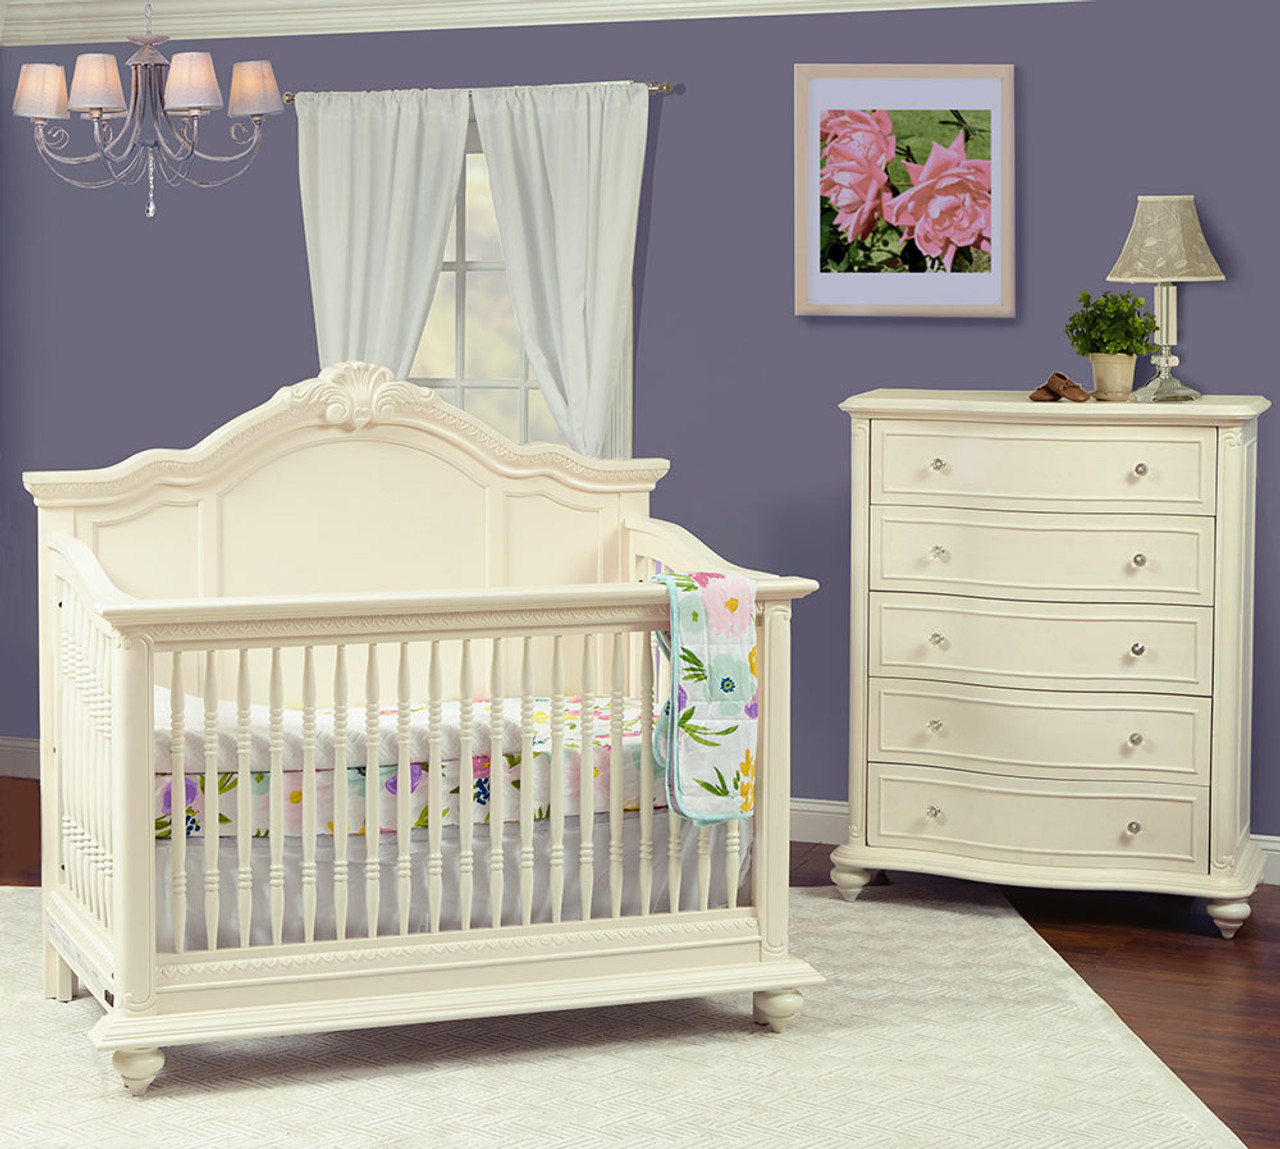 ALL ABOUT KINGSLEY'S NURSERY!